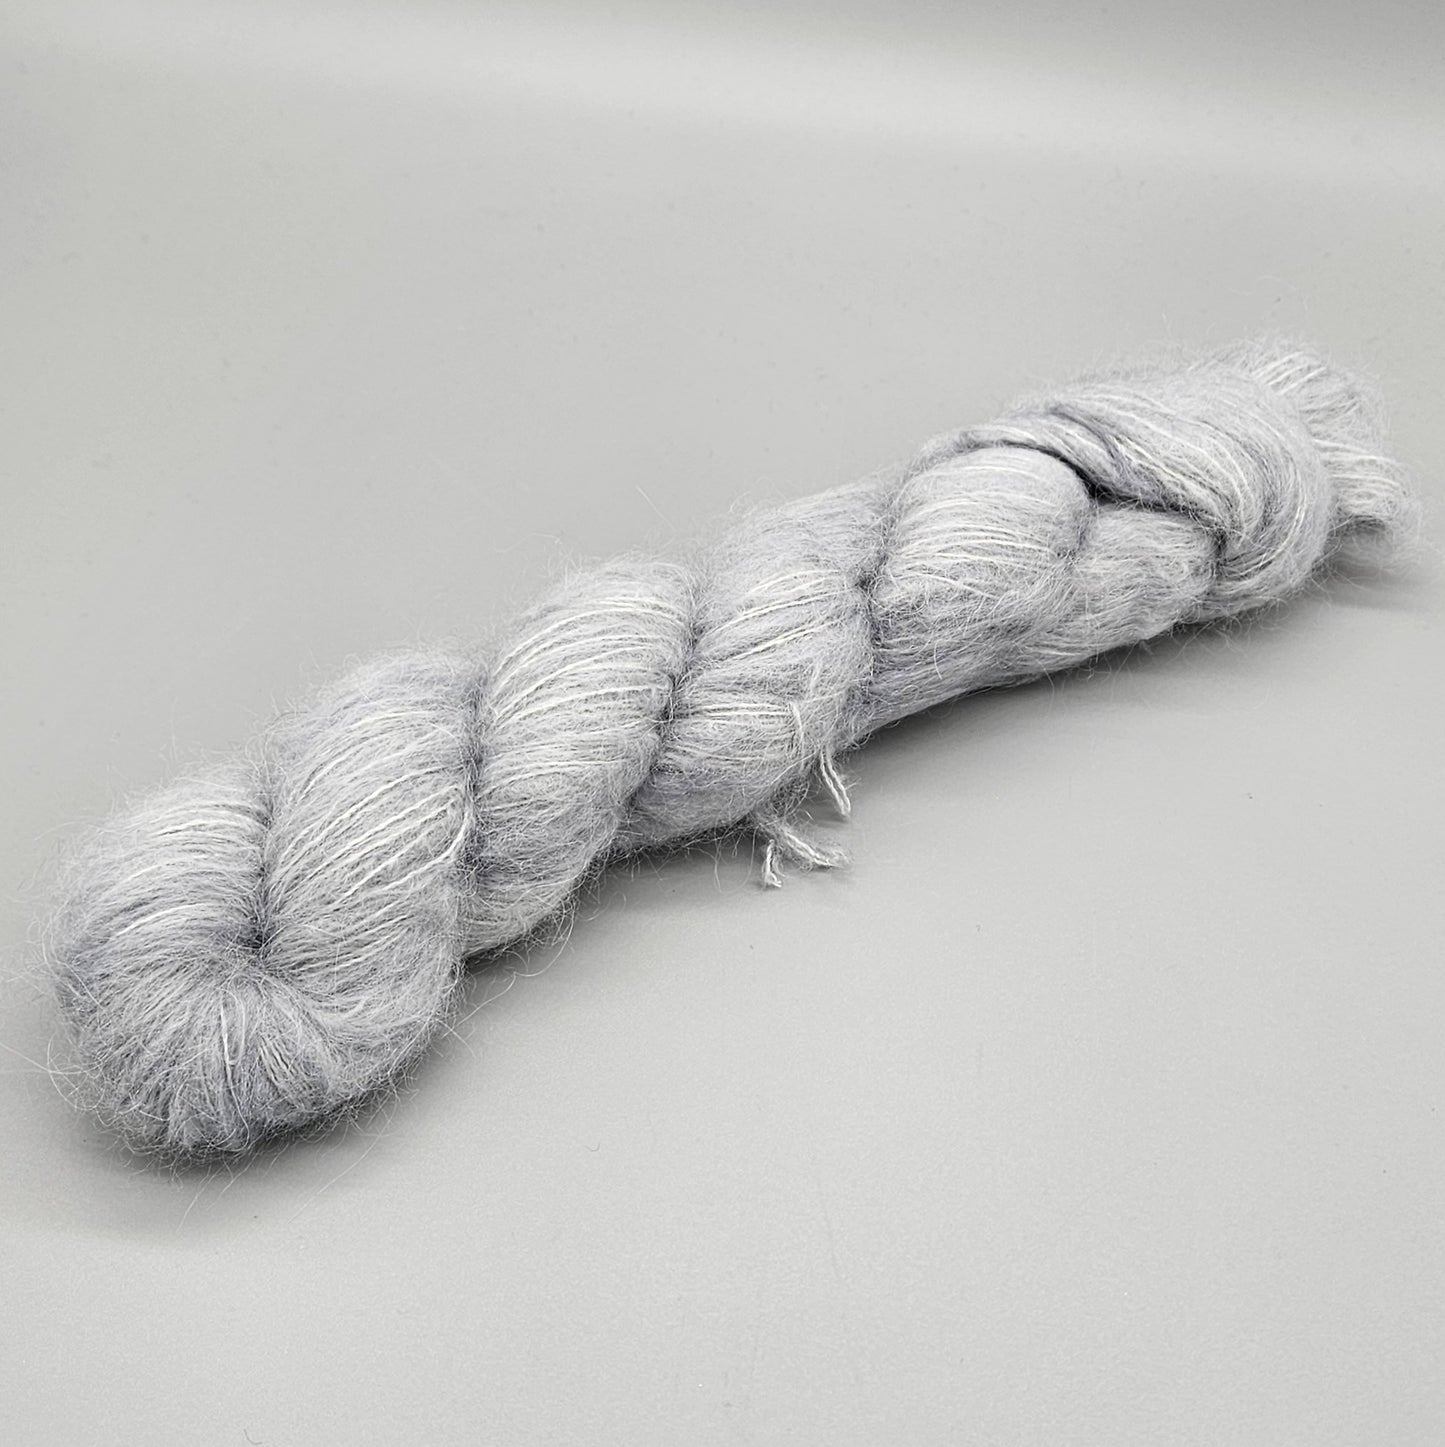 DYED TO ORDER - Suri Silk Fluff - Multiple Colours